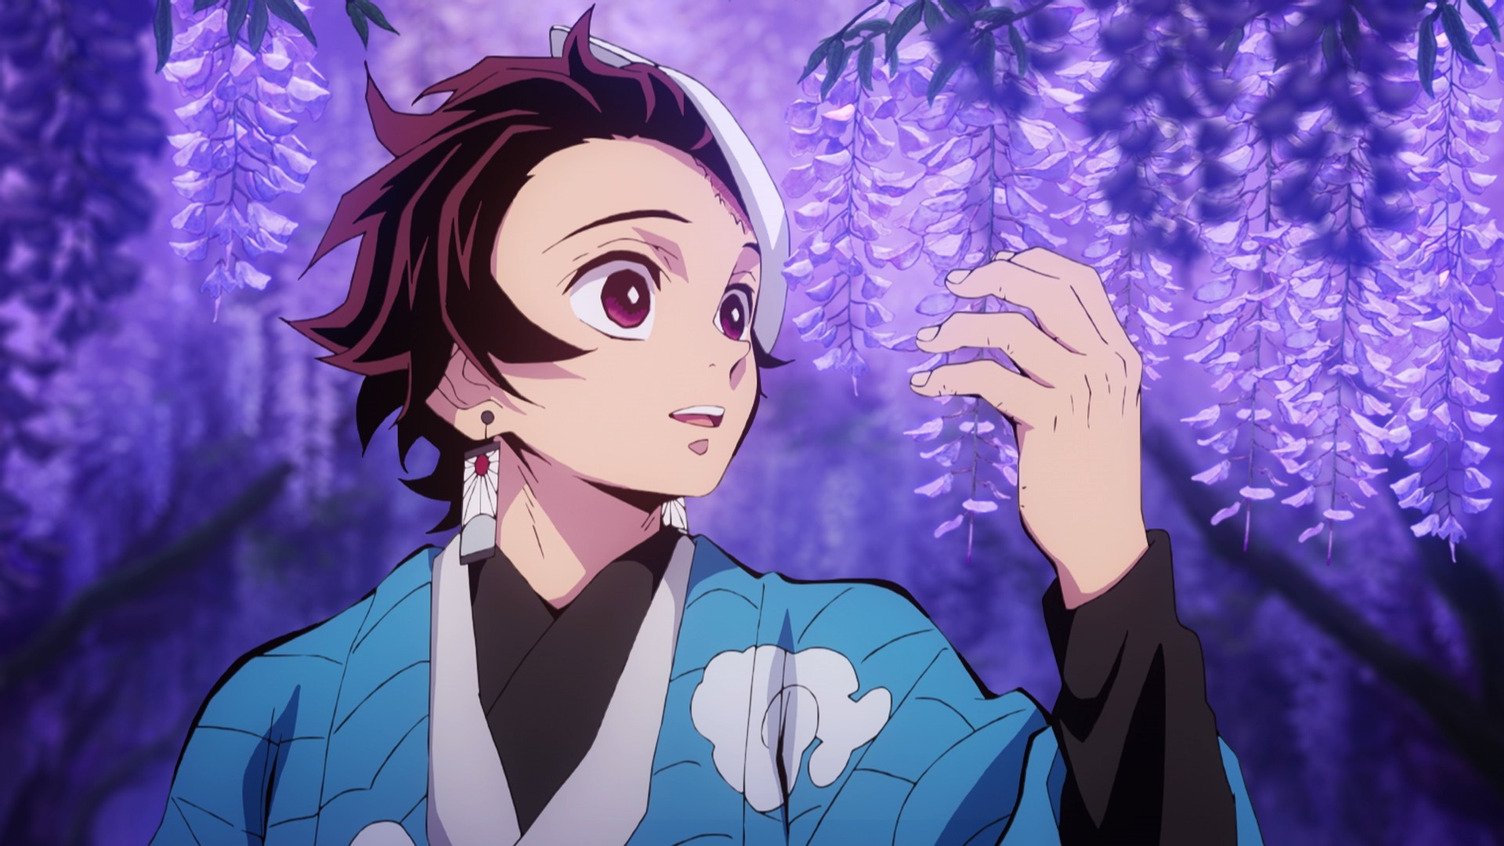 A screen shot of Tanjiro in the 'Demon Slayer' anime, based on the best-selling manga series by Koyoharu Gotouge